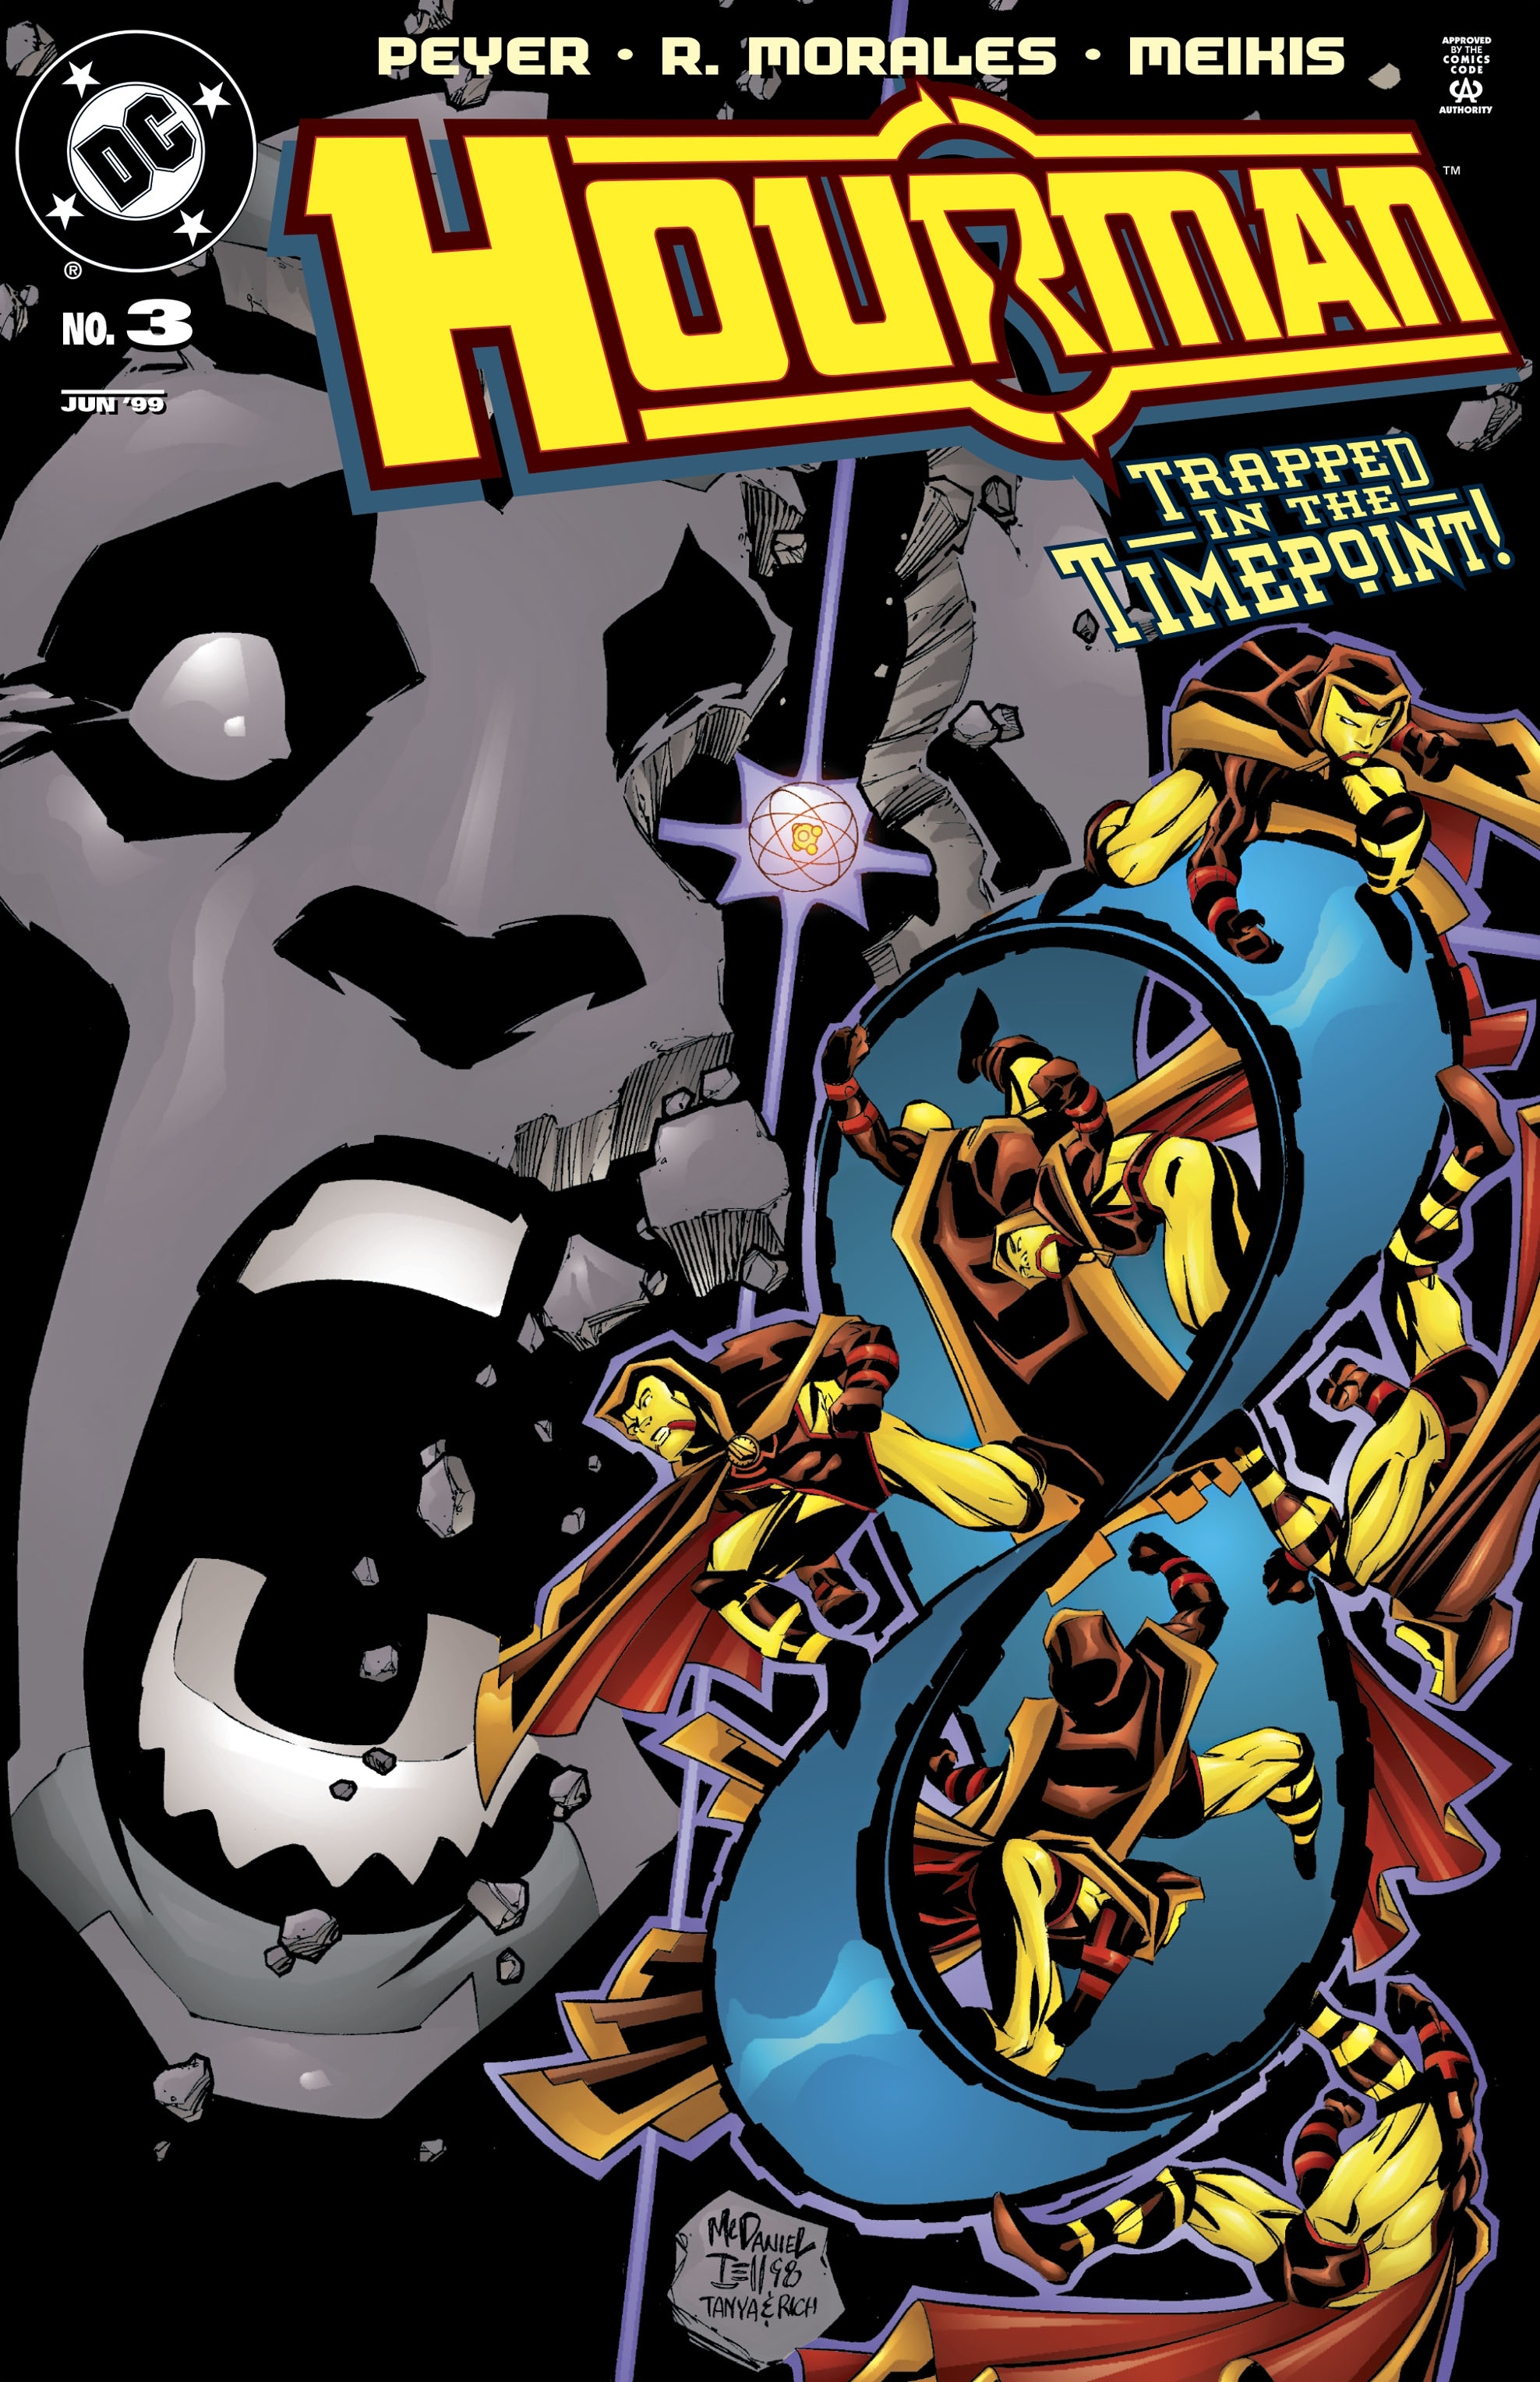 Read online Hourman comic -  Issue #3 - 1